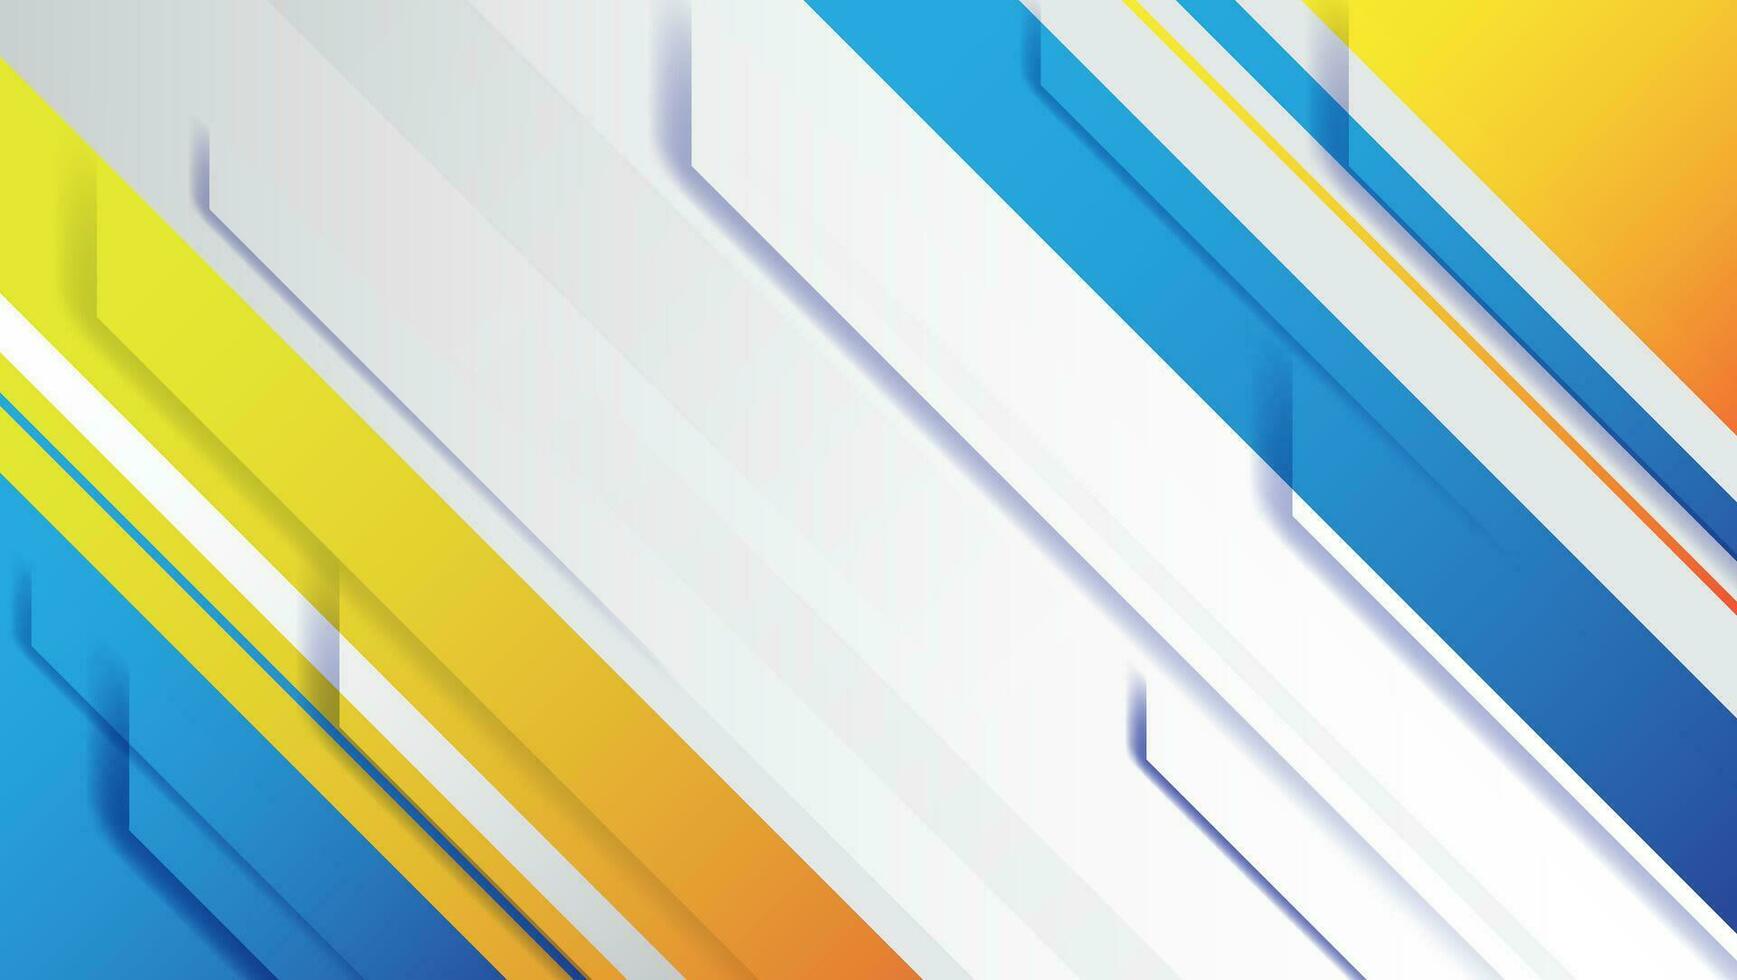 abstract background with diagonal stripes in blue and orange color. vector illustration